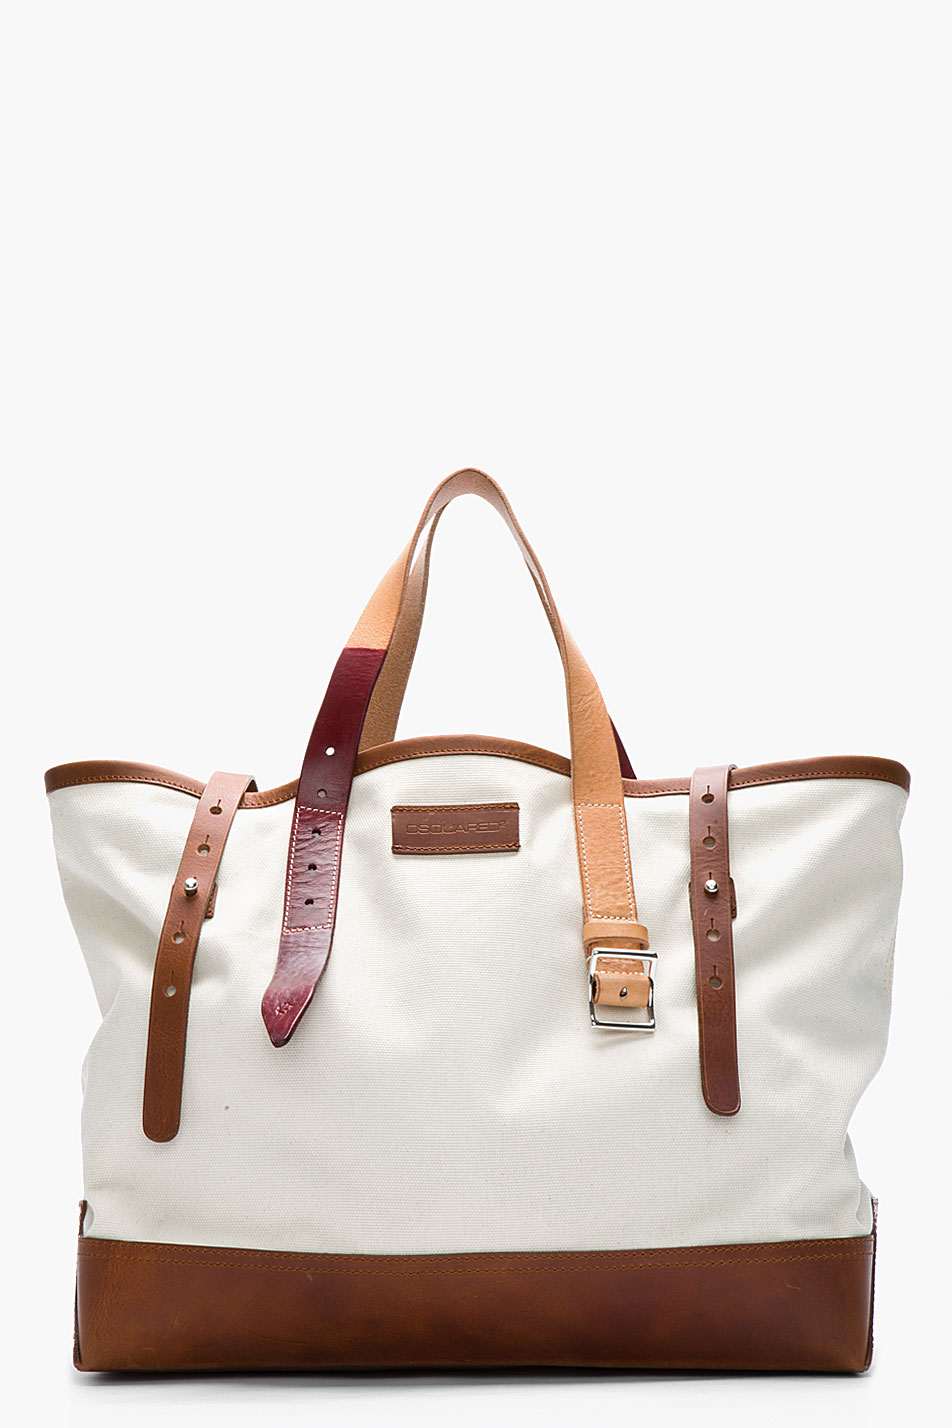 Lyst - Dsquared² Tan Canvas and Leather Dan and Dean Tote Bag in White ...